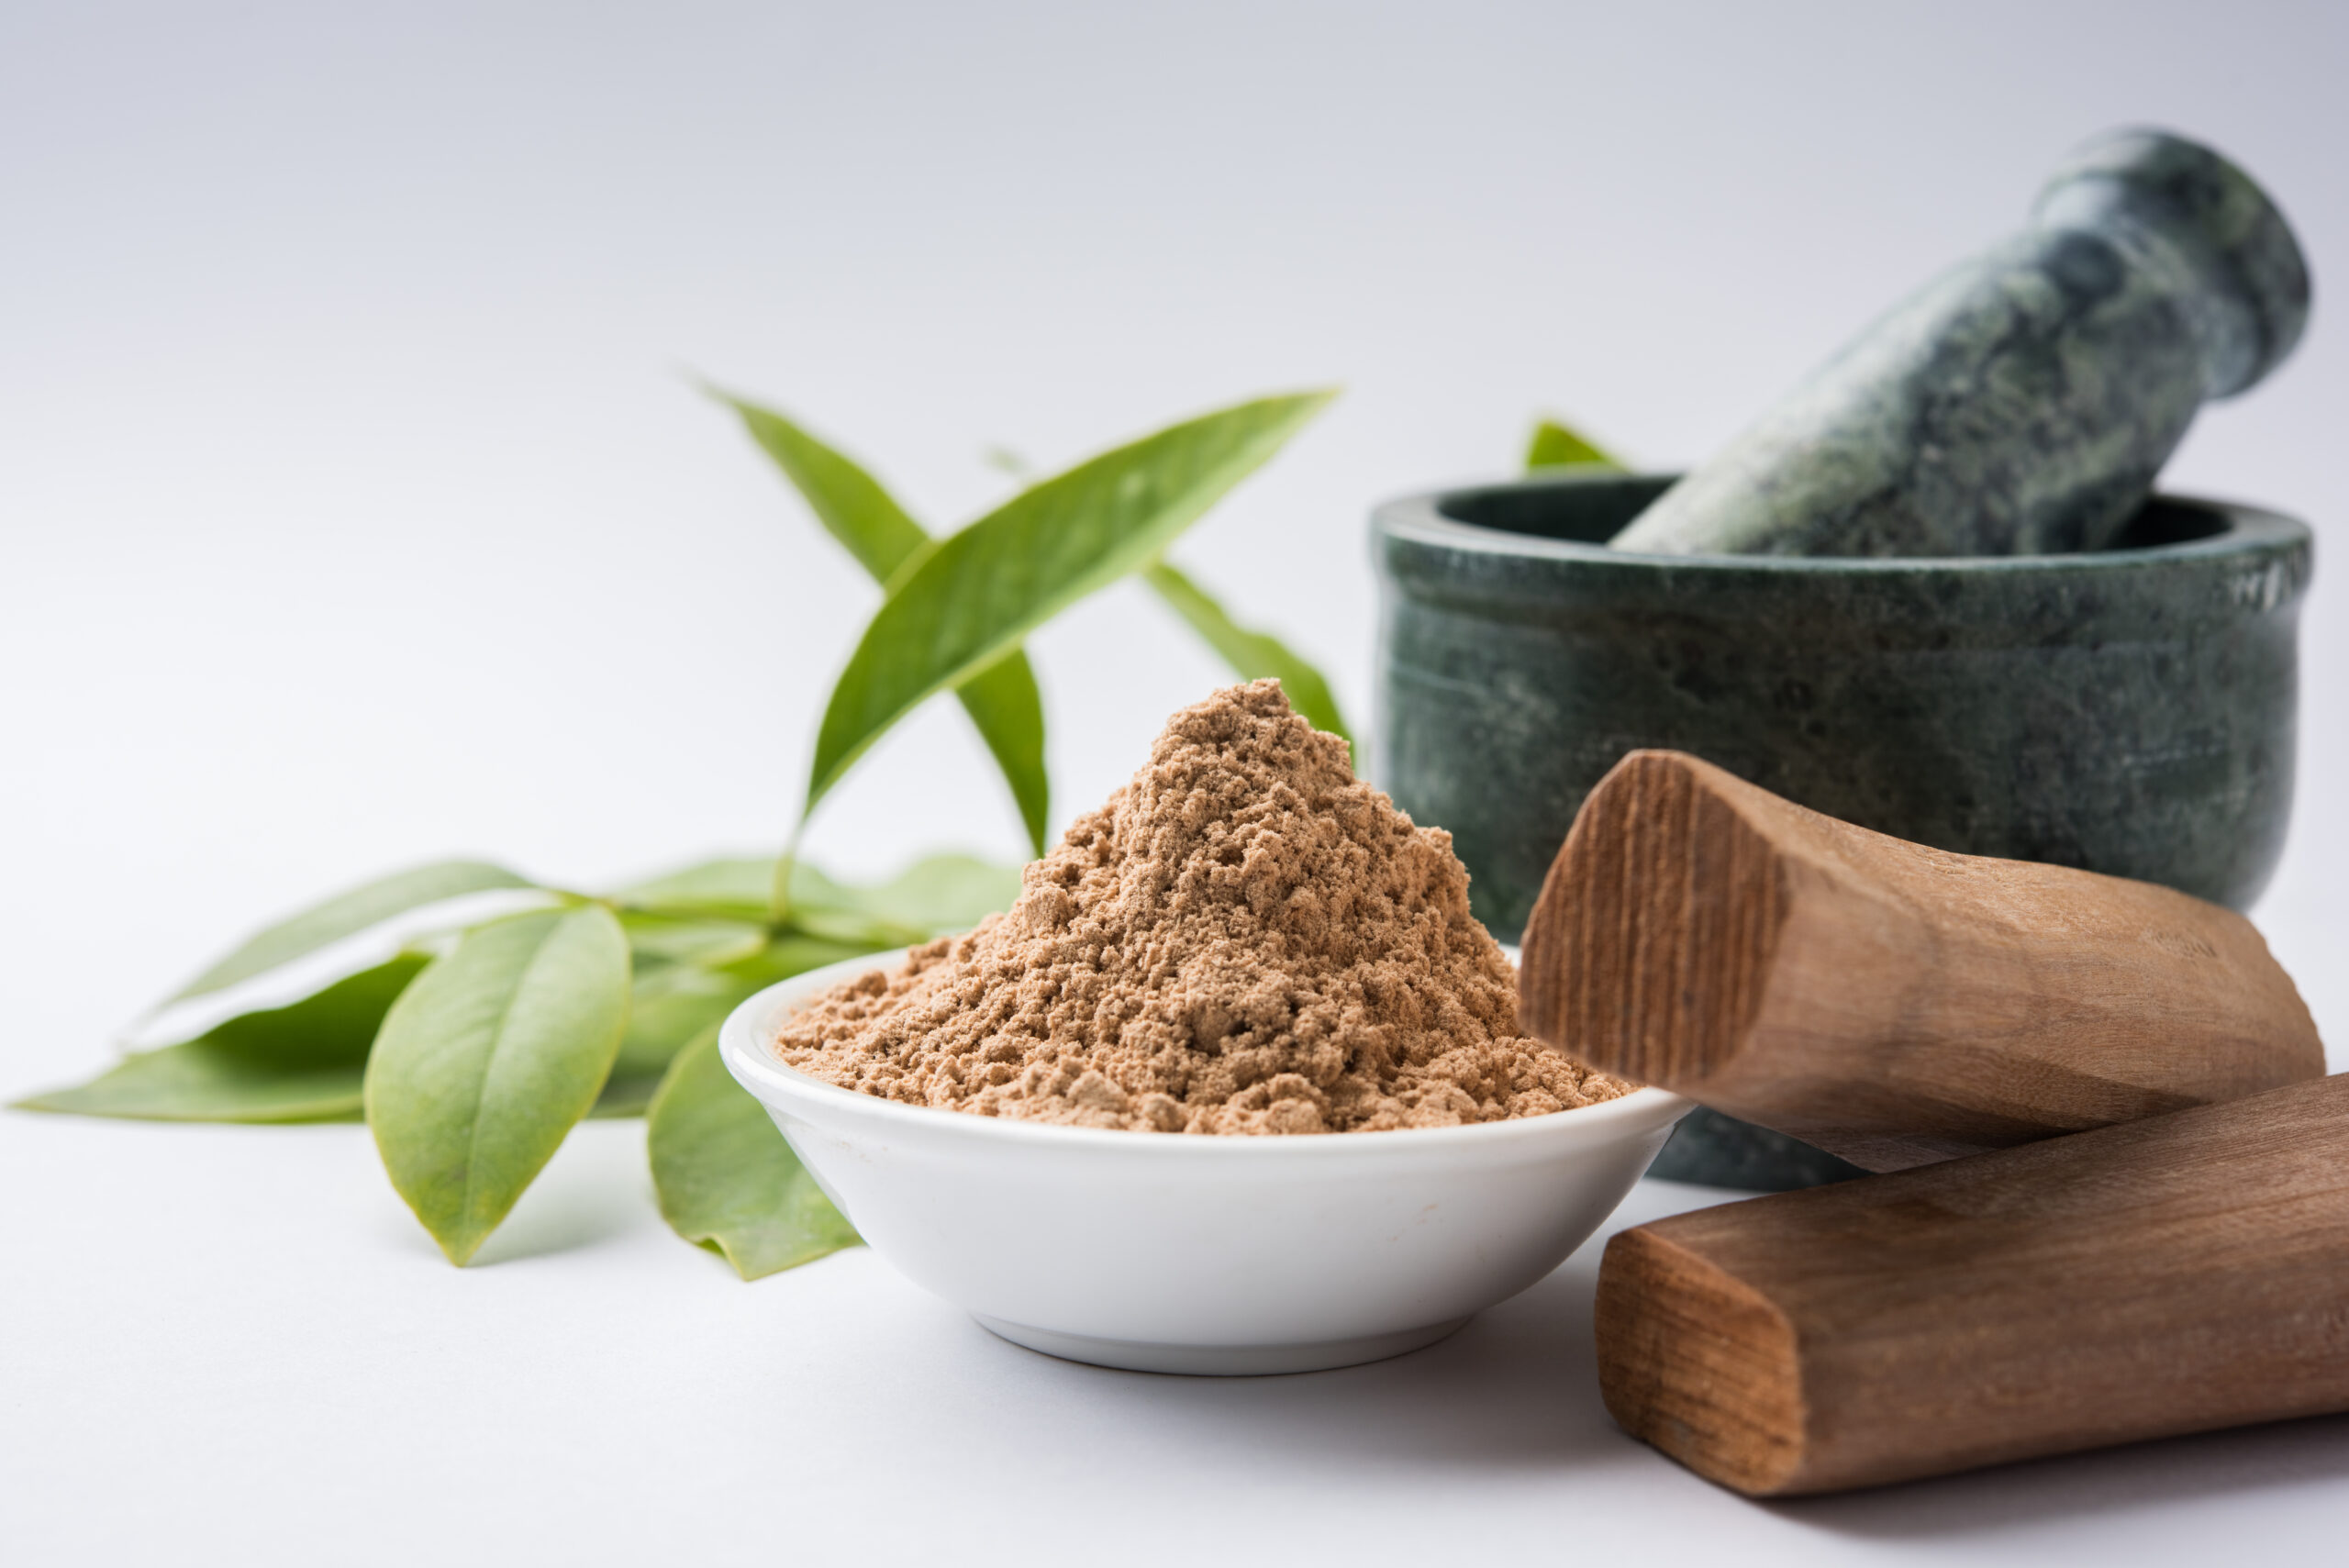 SKIN CARE 3 AMAZING BENEFITS OF SANDALWOOD AND WAYS TO INCORPORATE IT IN YOUR BEAUTY ROUTINE